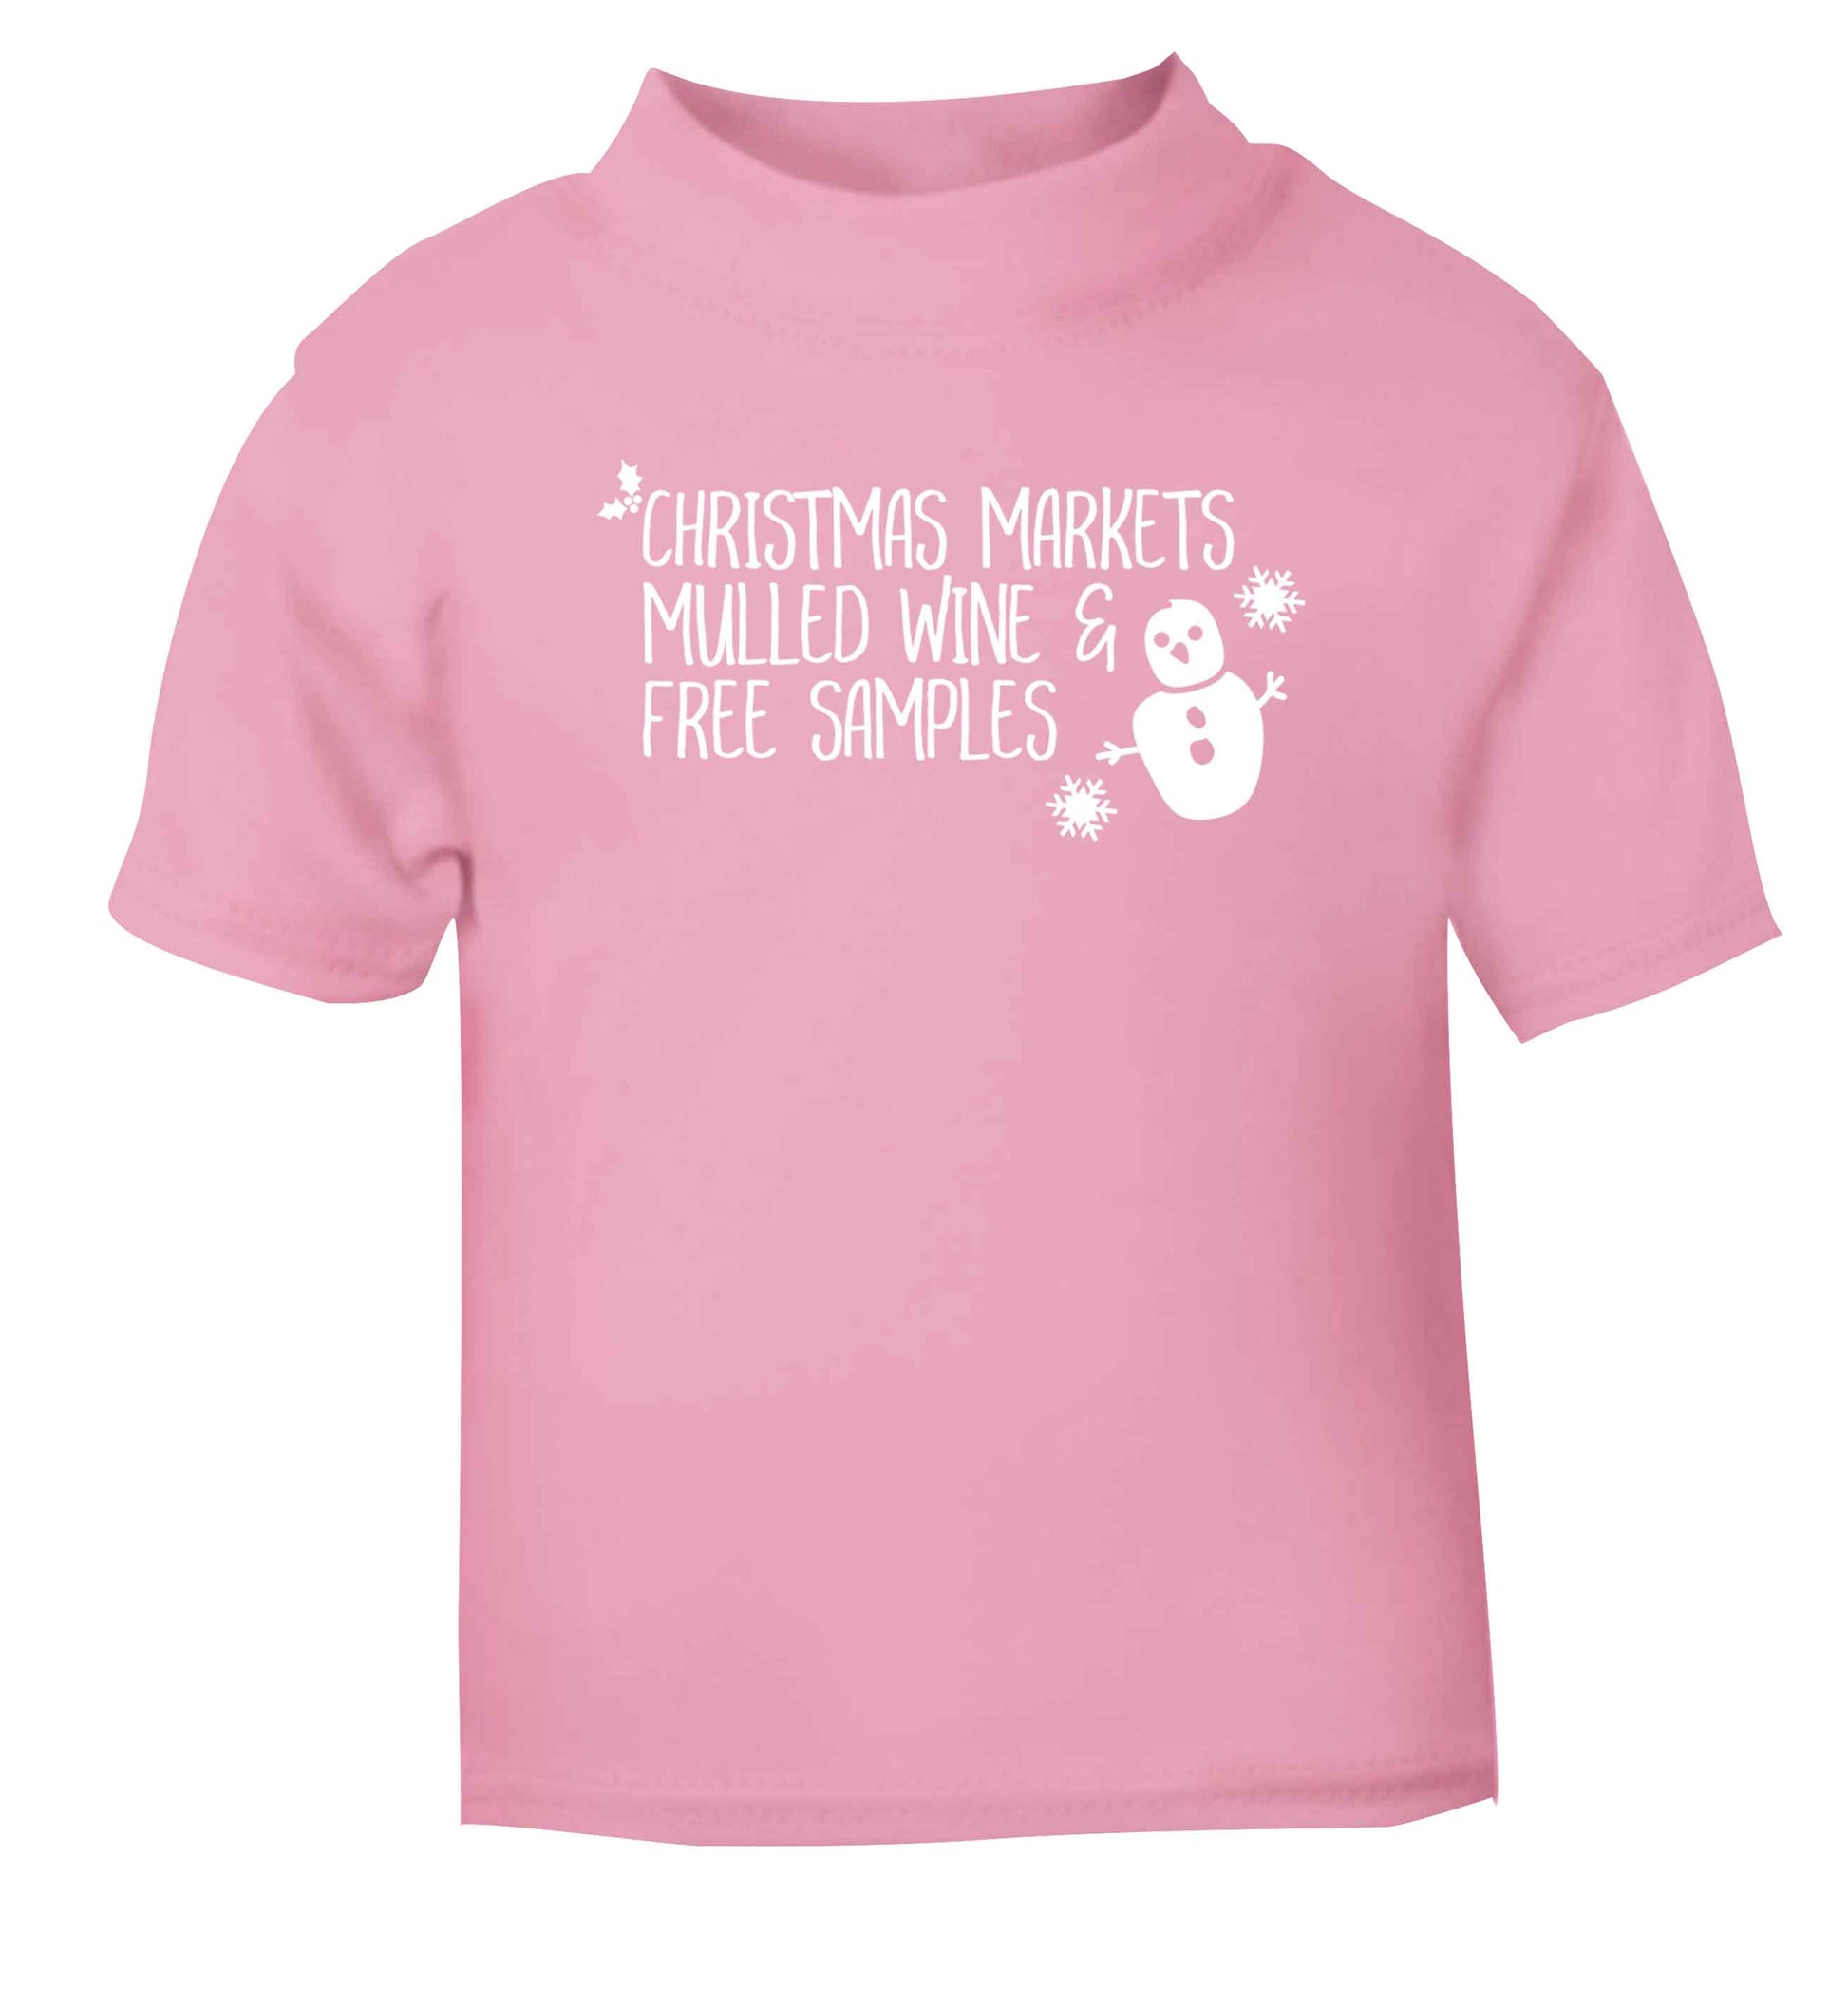 Christmas market mulled wine & free samples light pink Baby Toddler Tshirt 2 Years